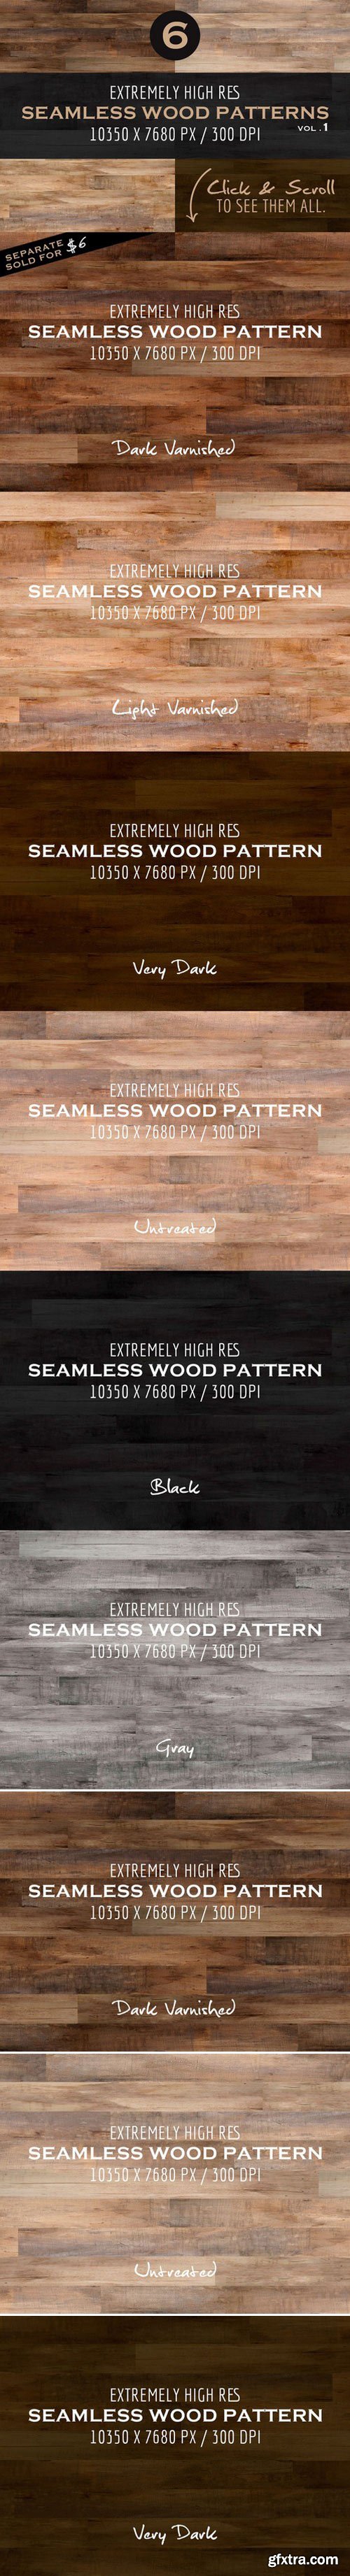 CM - Extremely HR Seamless Wood Patterns 90793